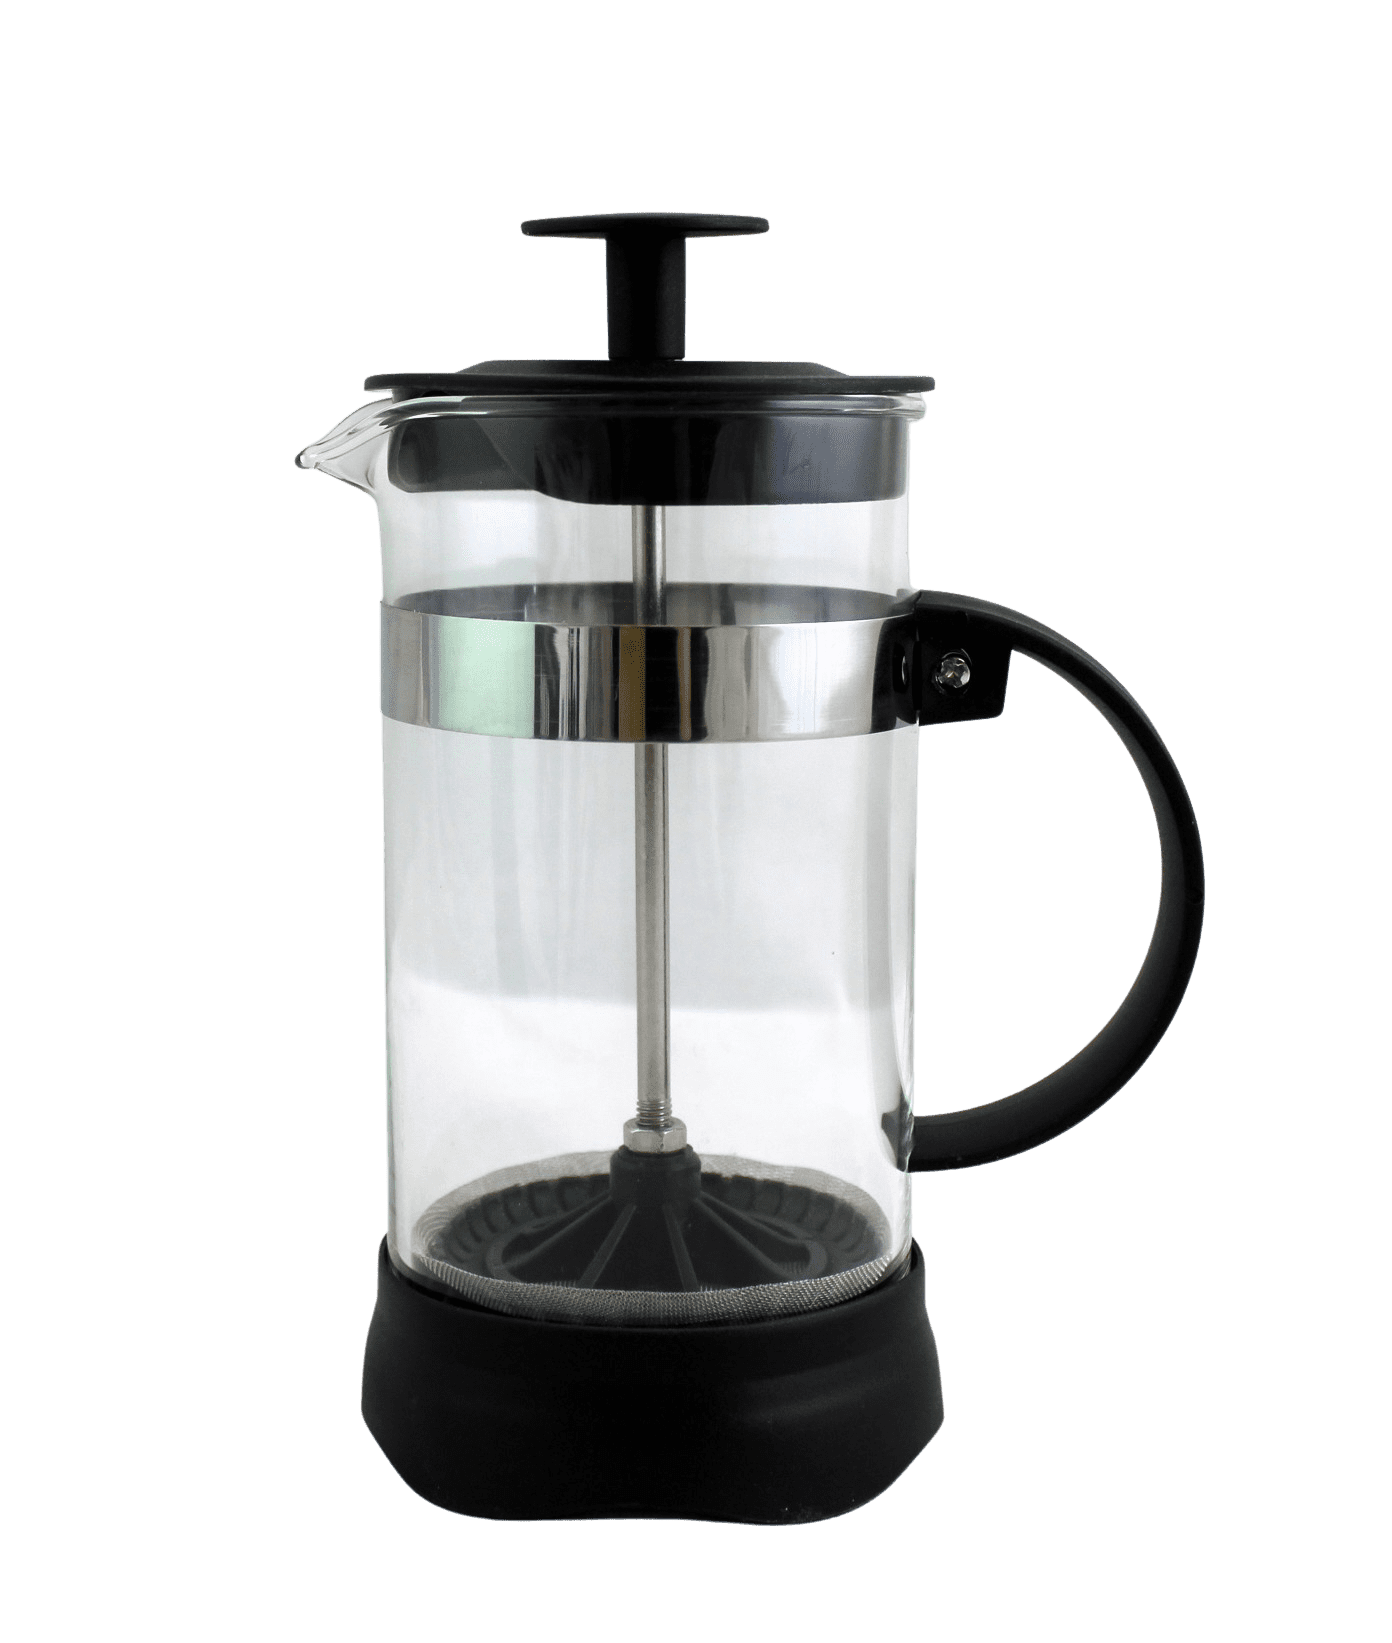 Mixpresso Stainless Steel French Press Coffee Maker 27 Oz 800 ml, Double  Wall Metal Insulation Coffee Press & Tea Brewer Easy Clean And Easy Press  Strong Quality Coffee Press. 